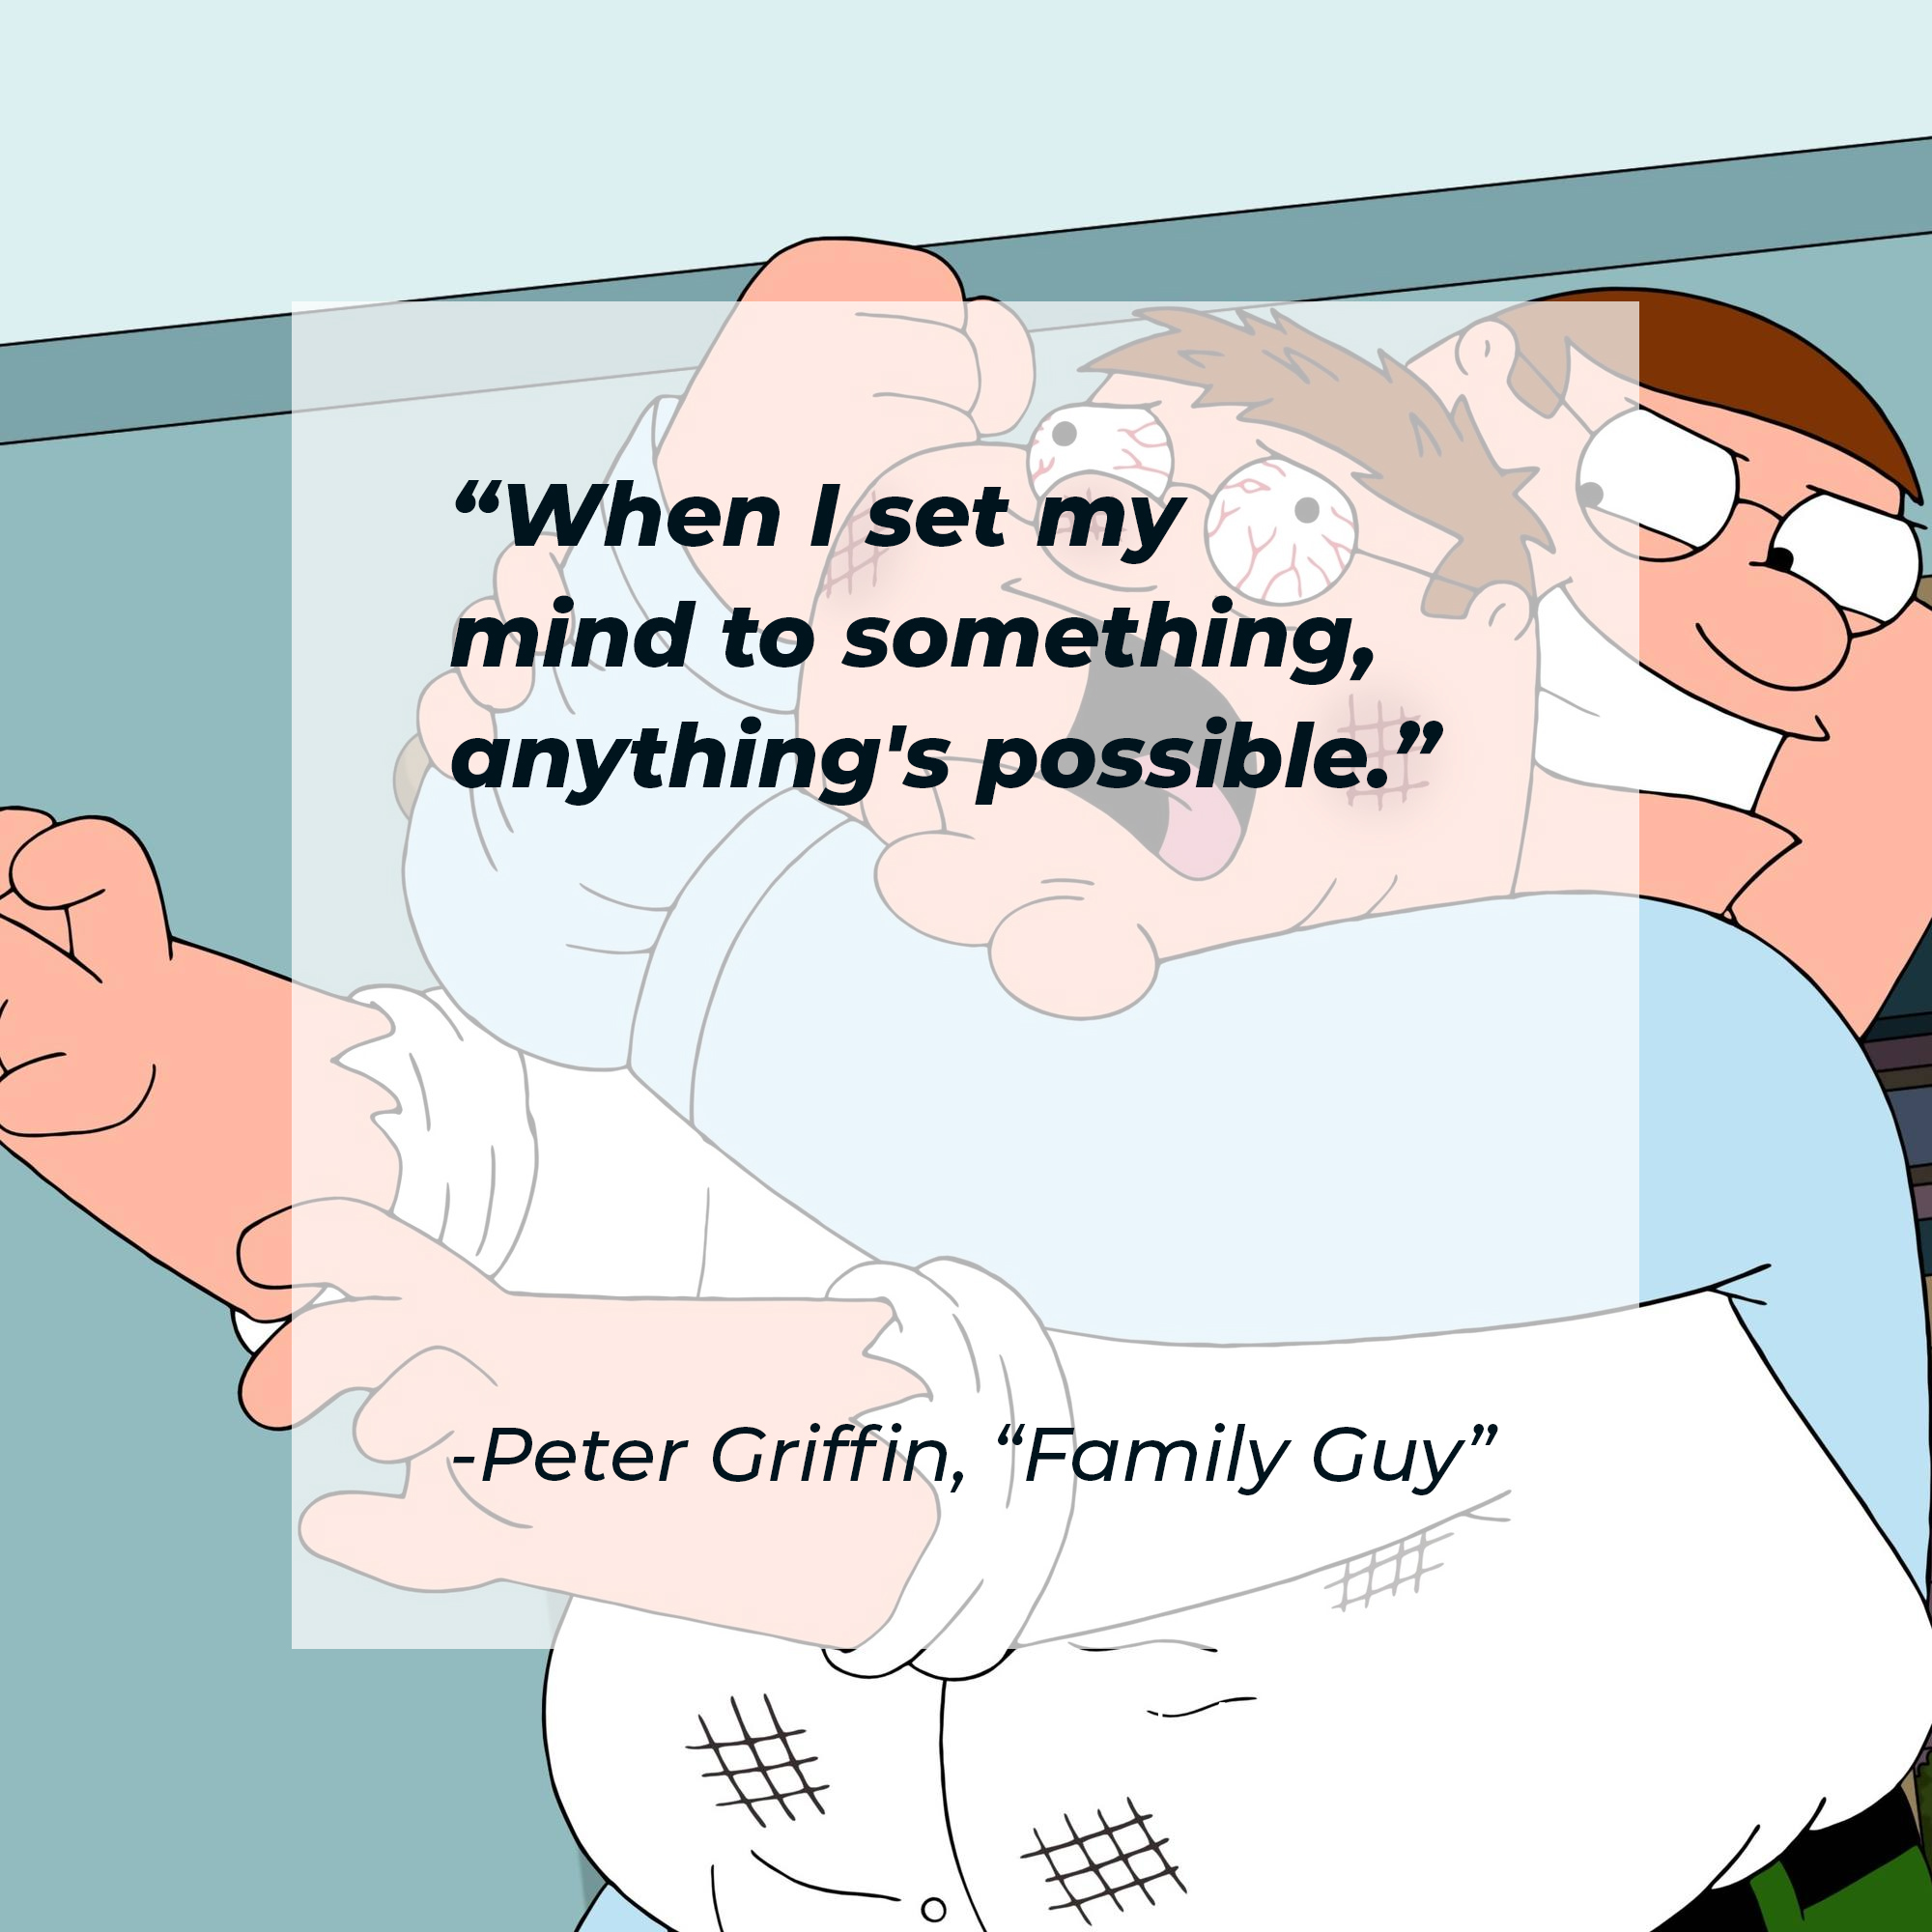 Peter Griffin's quote: "When I set my mind to something, anything's possible." | Source: facebook.com/FamilyGuy